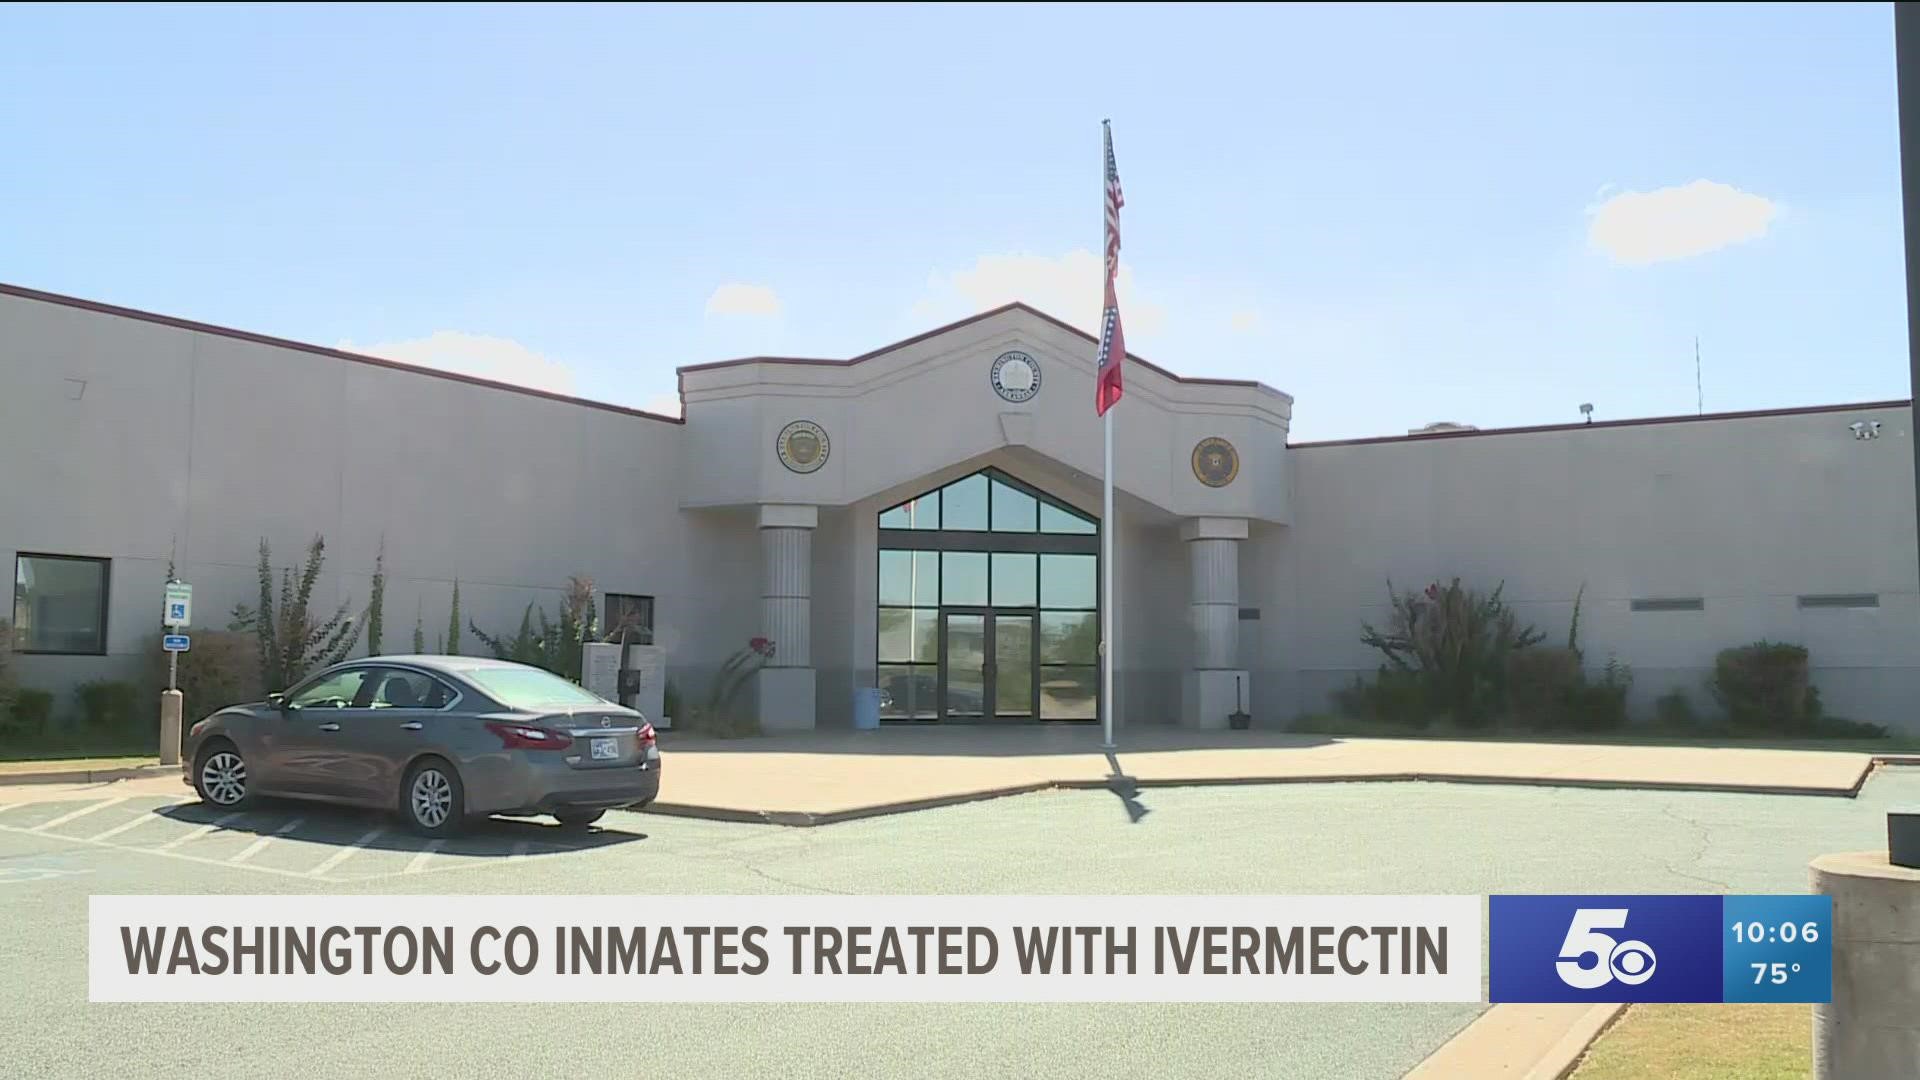 The jail, along with a local doctor, is being questioned about using Ivermectin, a livestock deworming medication, to treat COVID-19 symptoms.